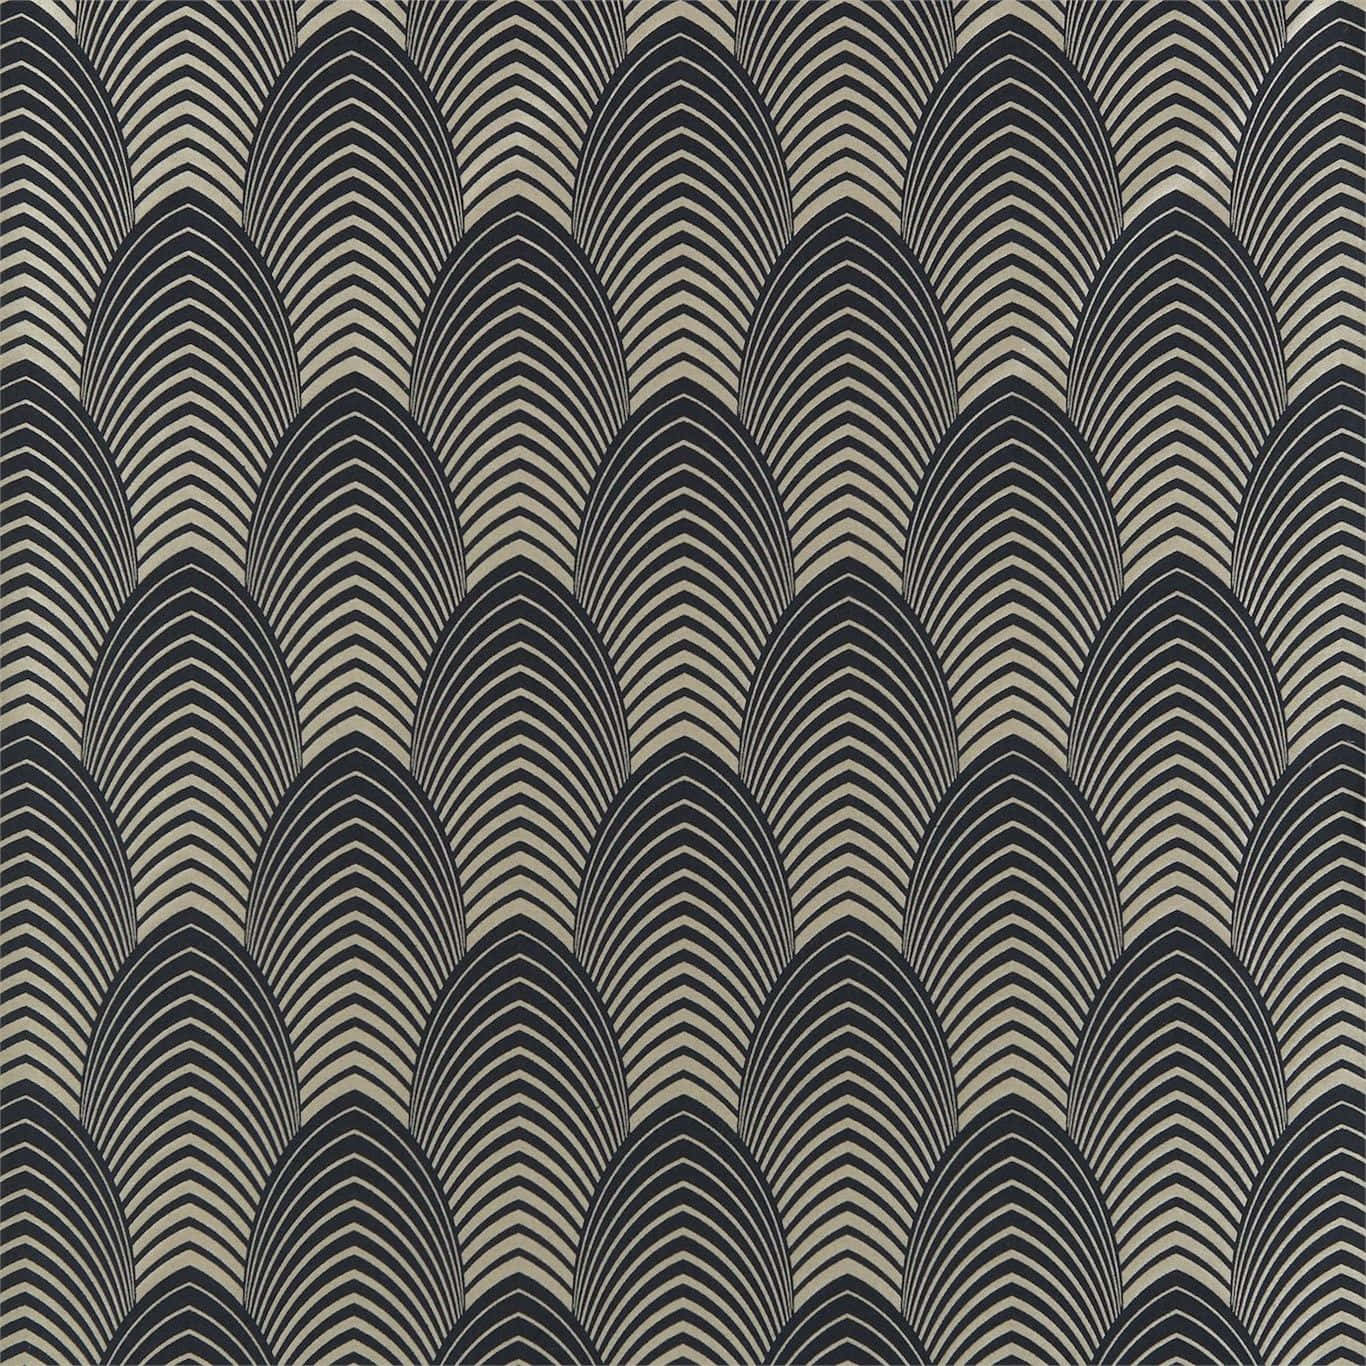 Curved Lines Art Deco Iphone Wallpaper